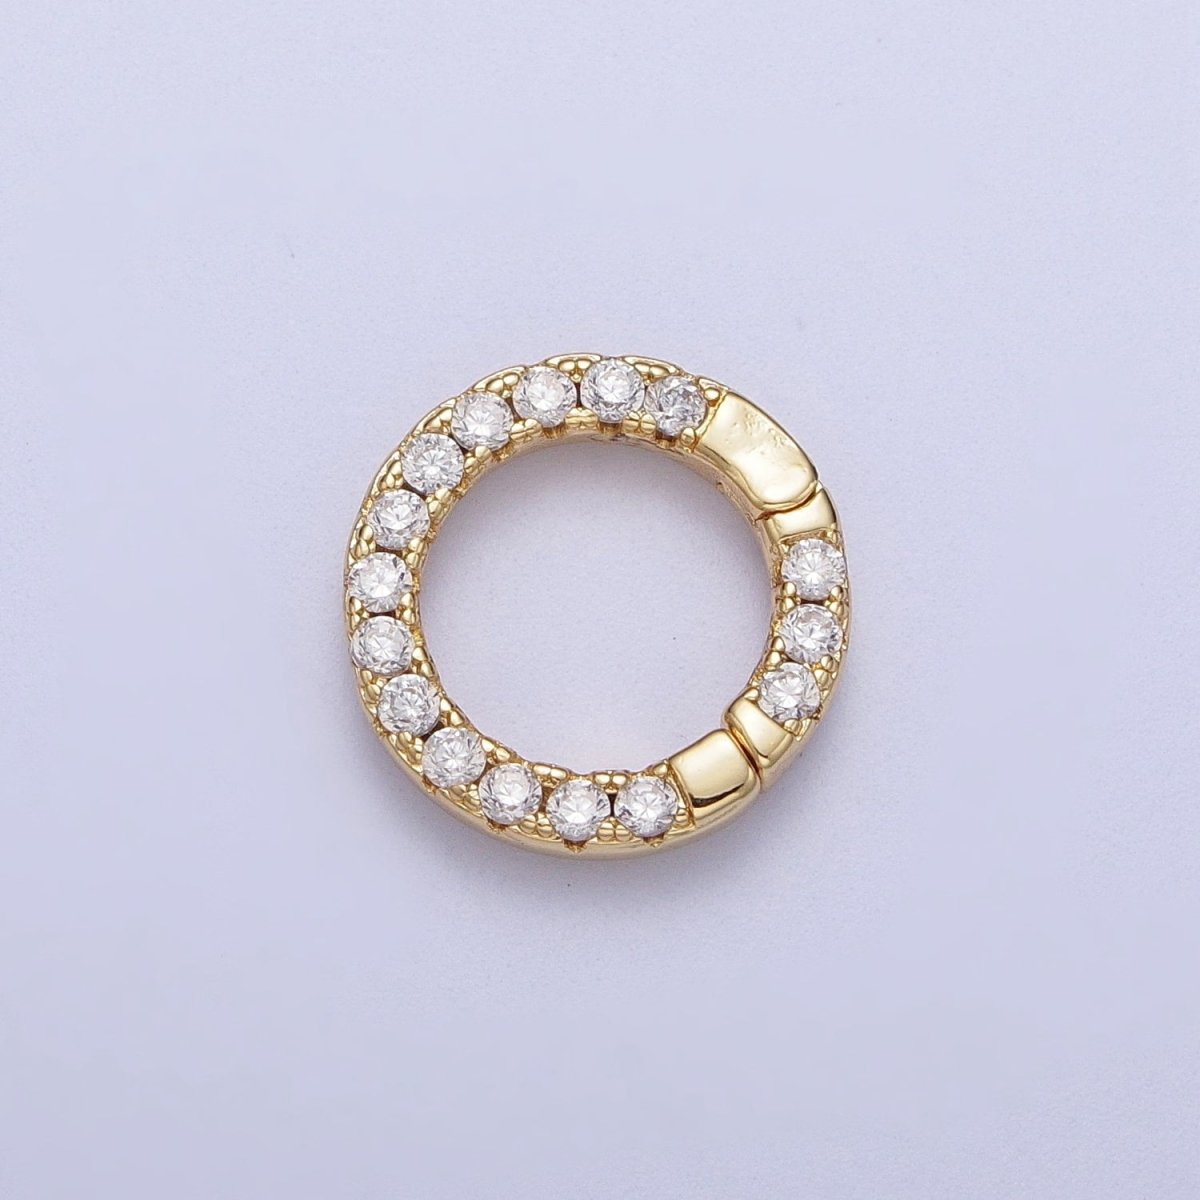 Cubic Push Gate Ring Gold Micro Pave Round Spring Gate Ring WHOLESALE Supplies K-047 L-930 - DLUXCA